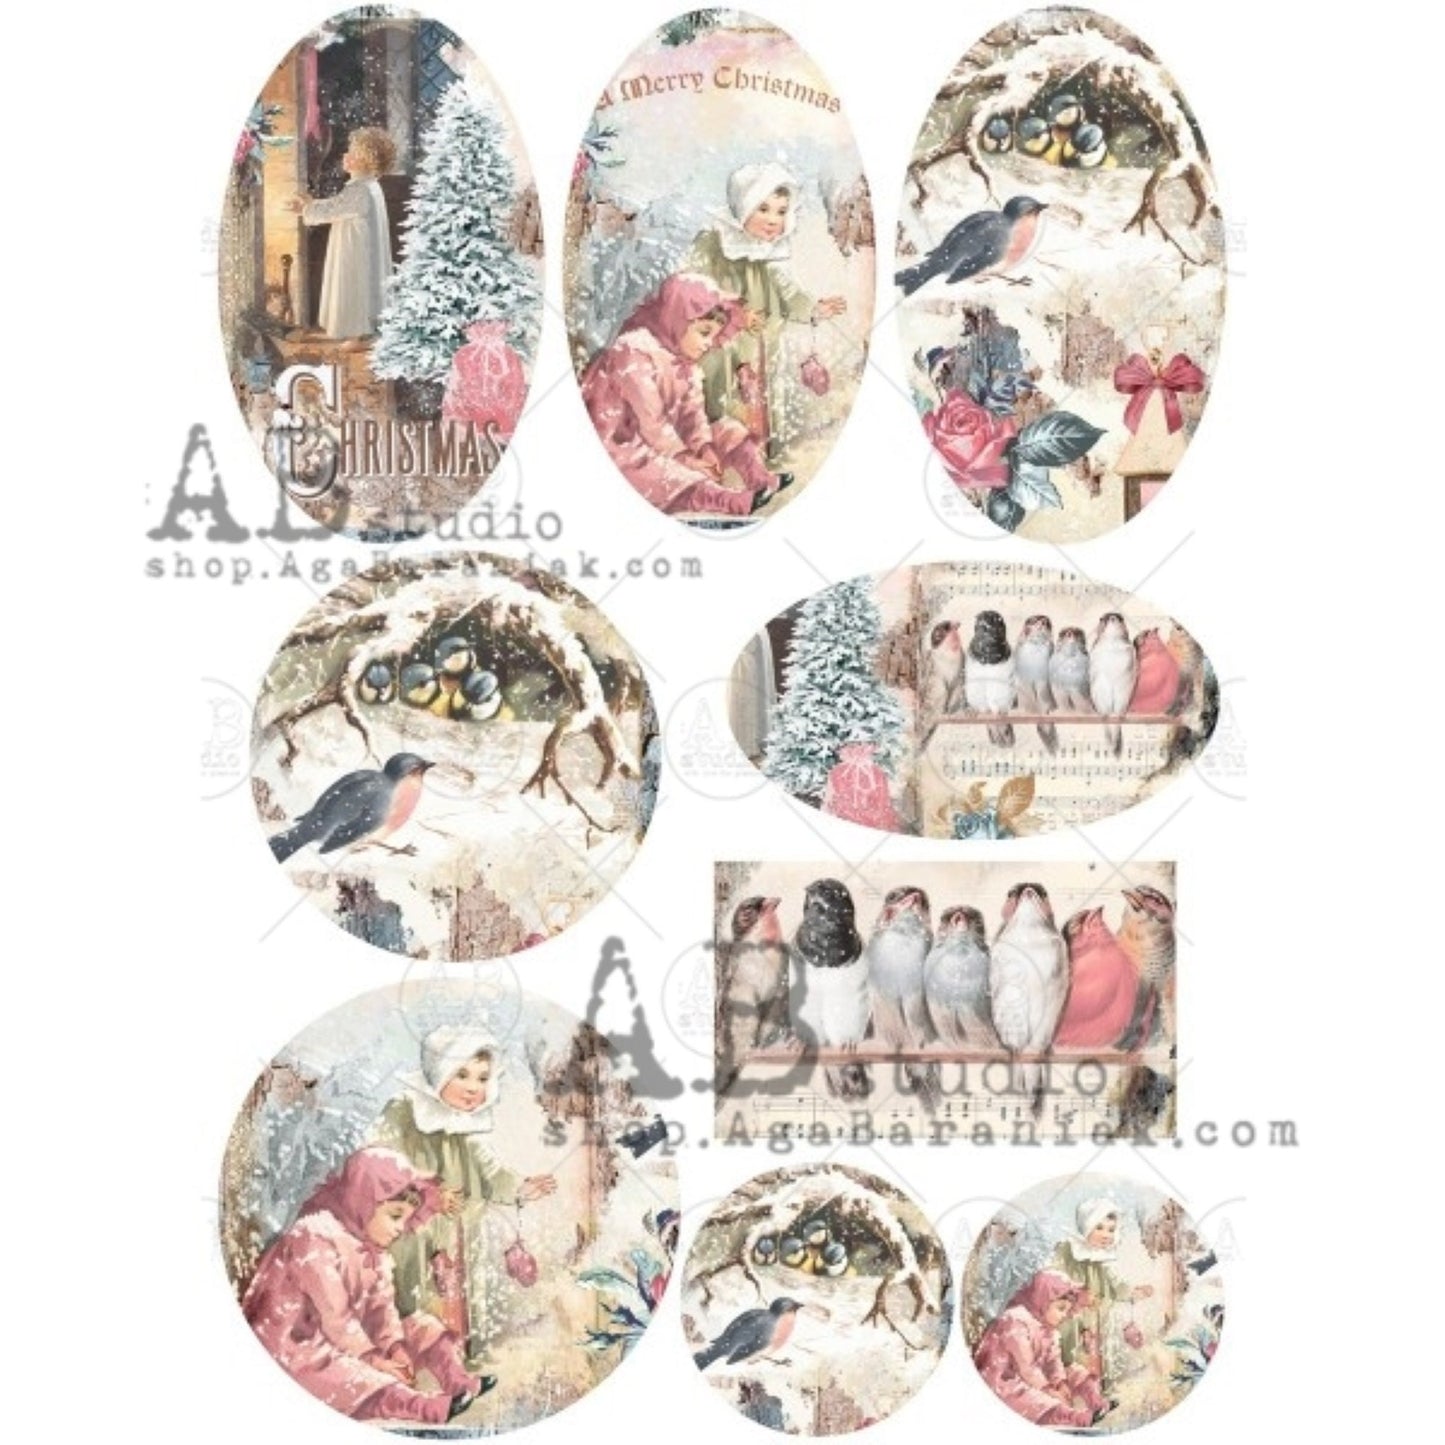 AB Studio Christmas Vintage Children Birds #0368 Shabby Chic Size: A4 - 8.27 X 11.69 inches Rice Paper for Decoupage Imported from Poland